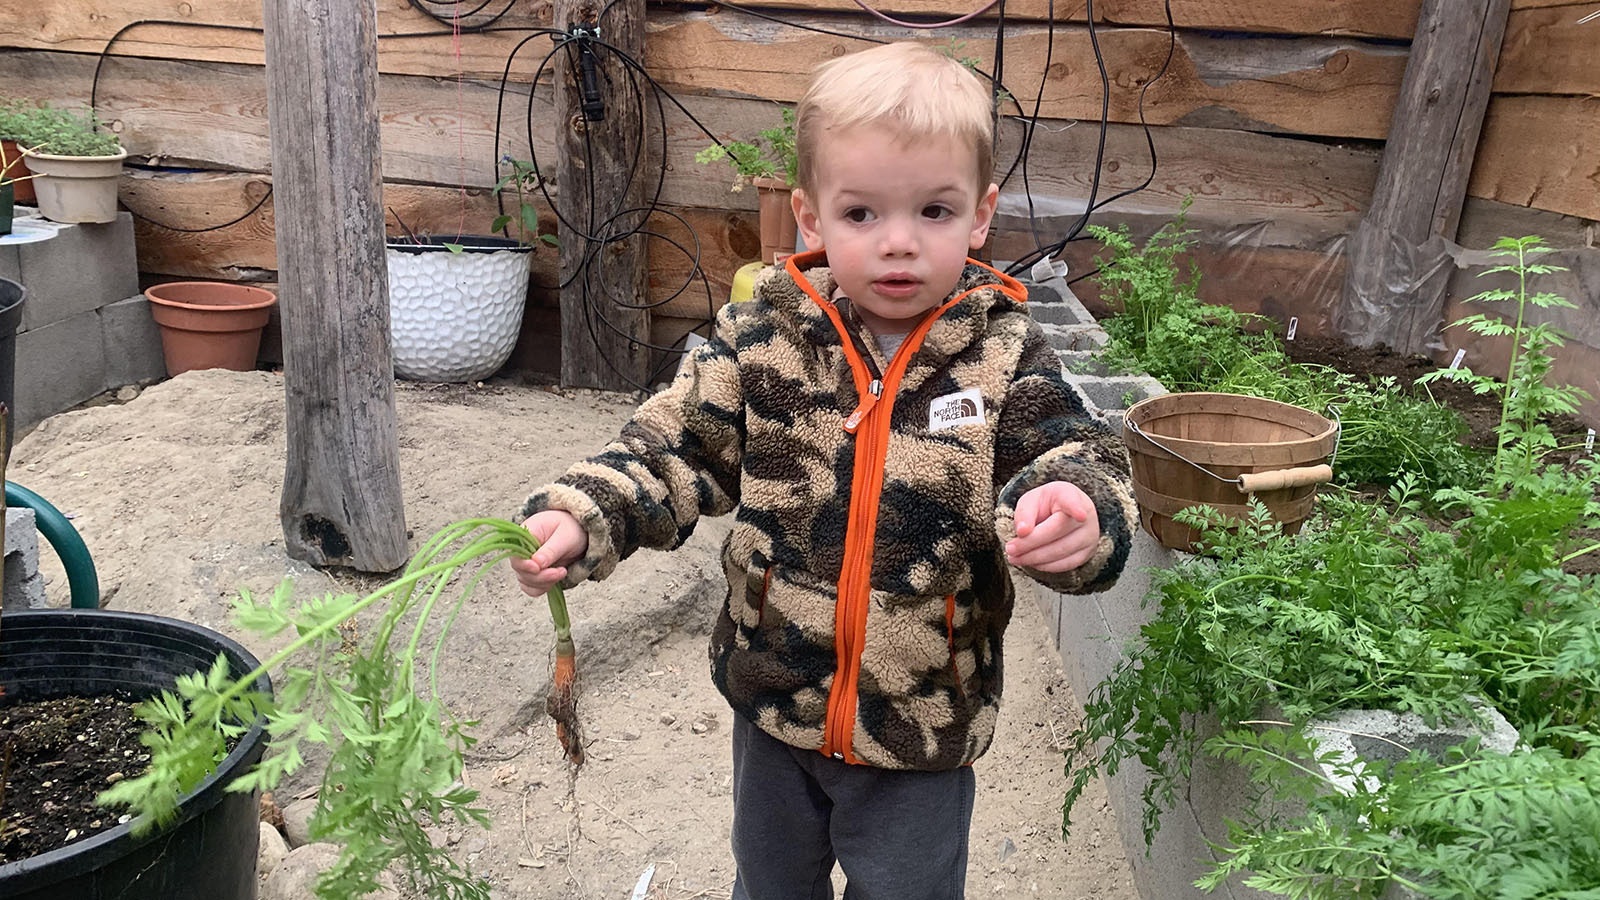 Sara Ross' 2-year-old grandson Huxton loves to pick and eat fresh carrots from her underground greenhouse, called a walipini, which allows her to grow vegetables year-round despite Wyoming's brutal winters.